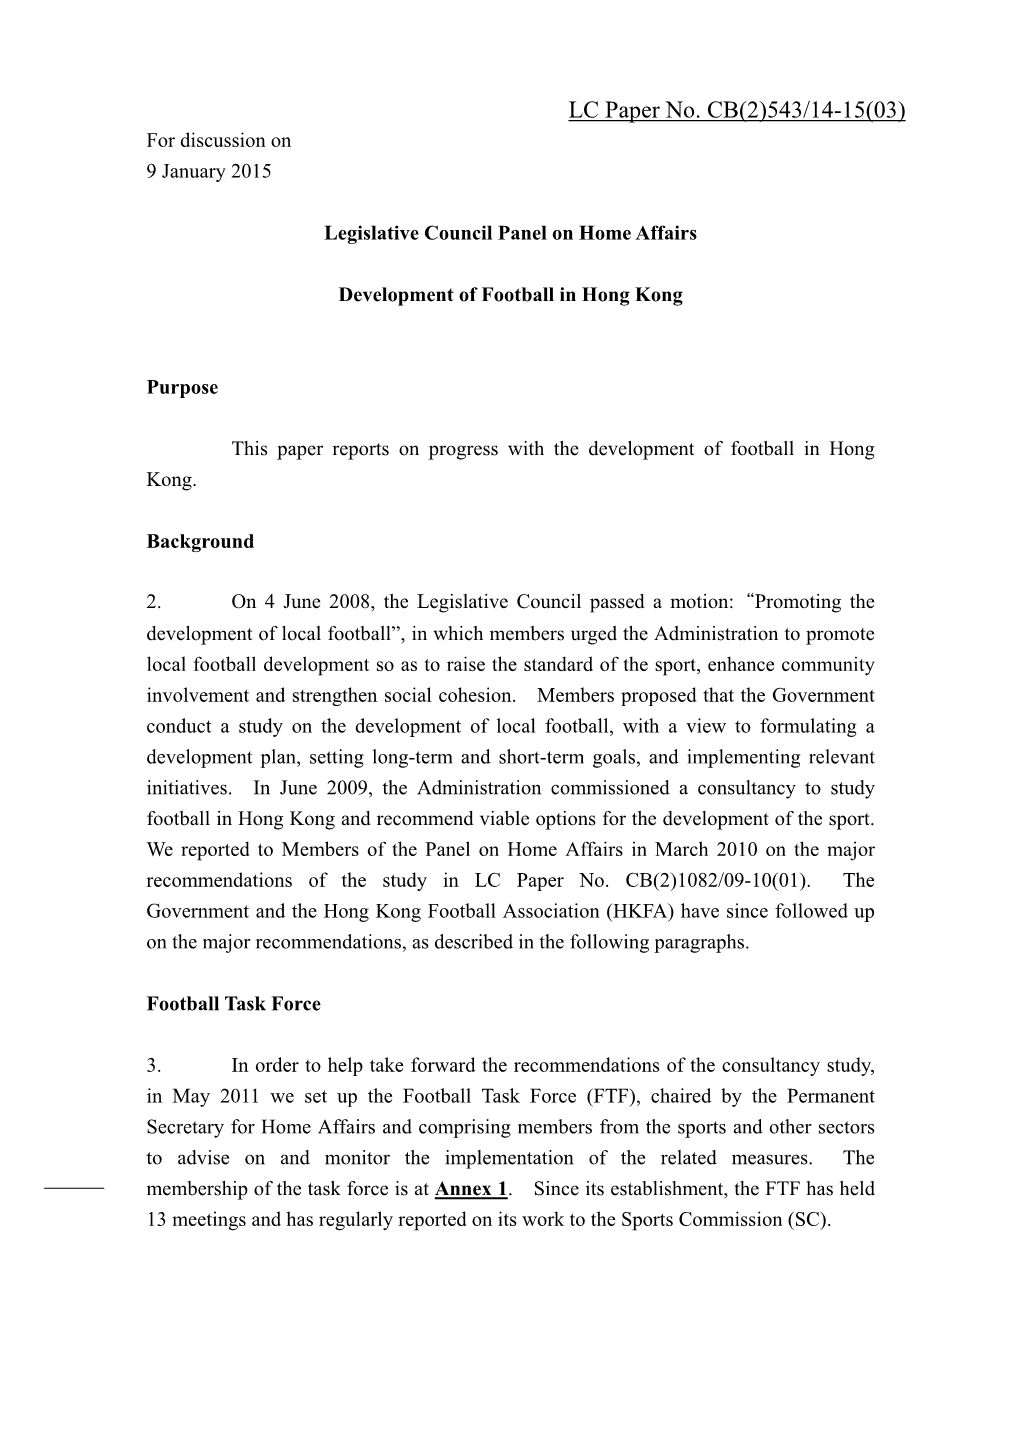 Administration's Paper on the Development of Football in Hong Kong